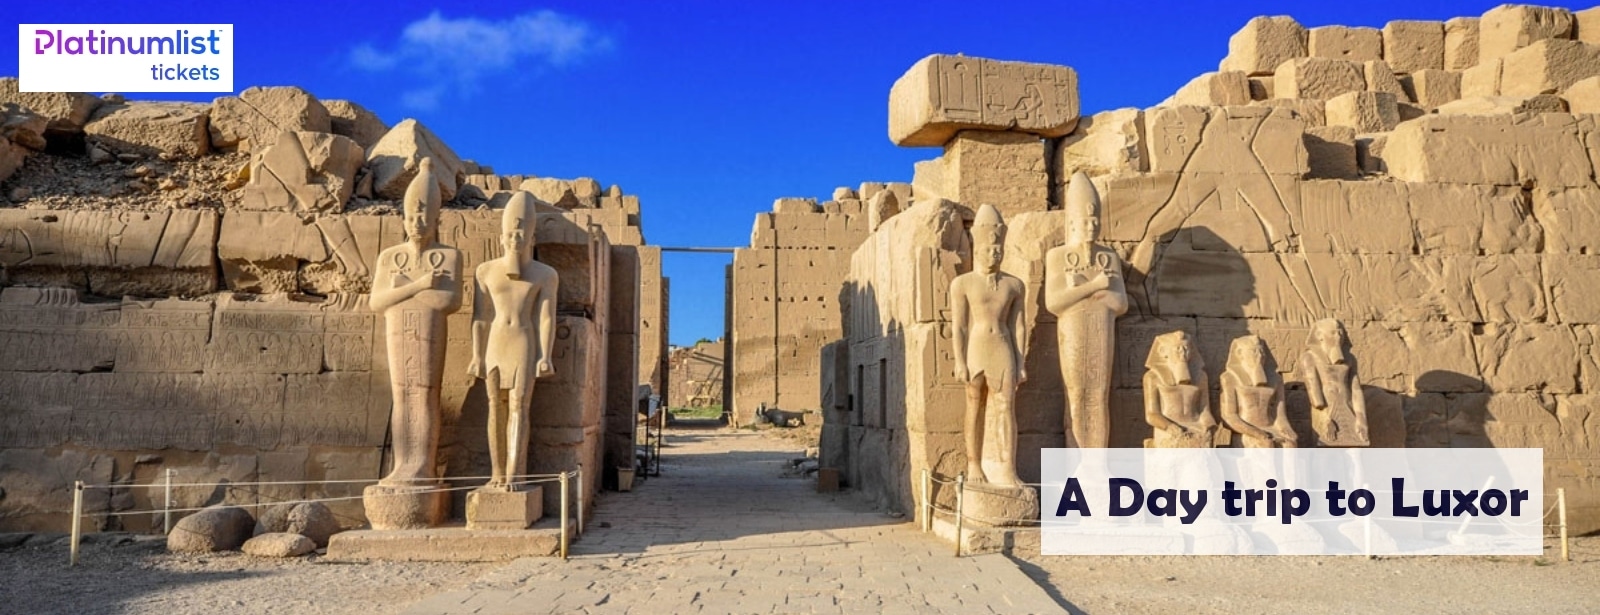 A day trip to Luxor